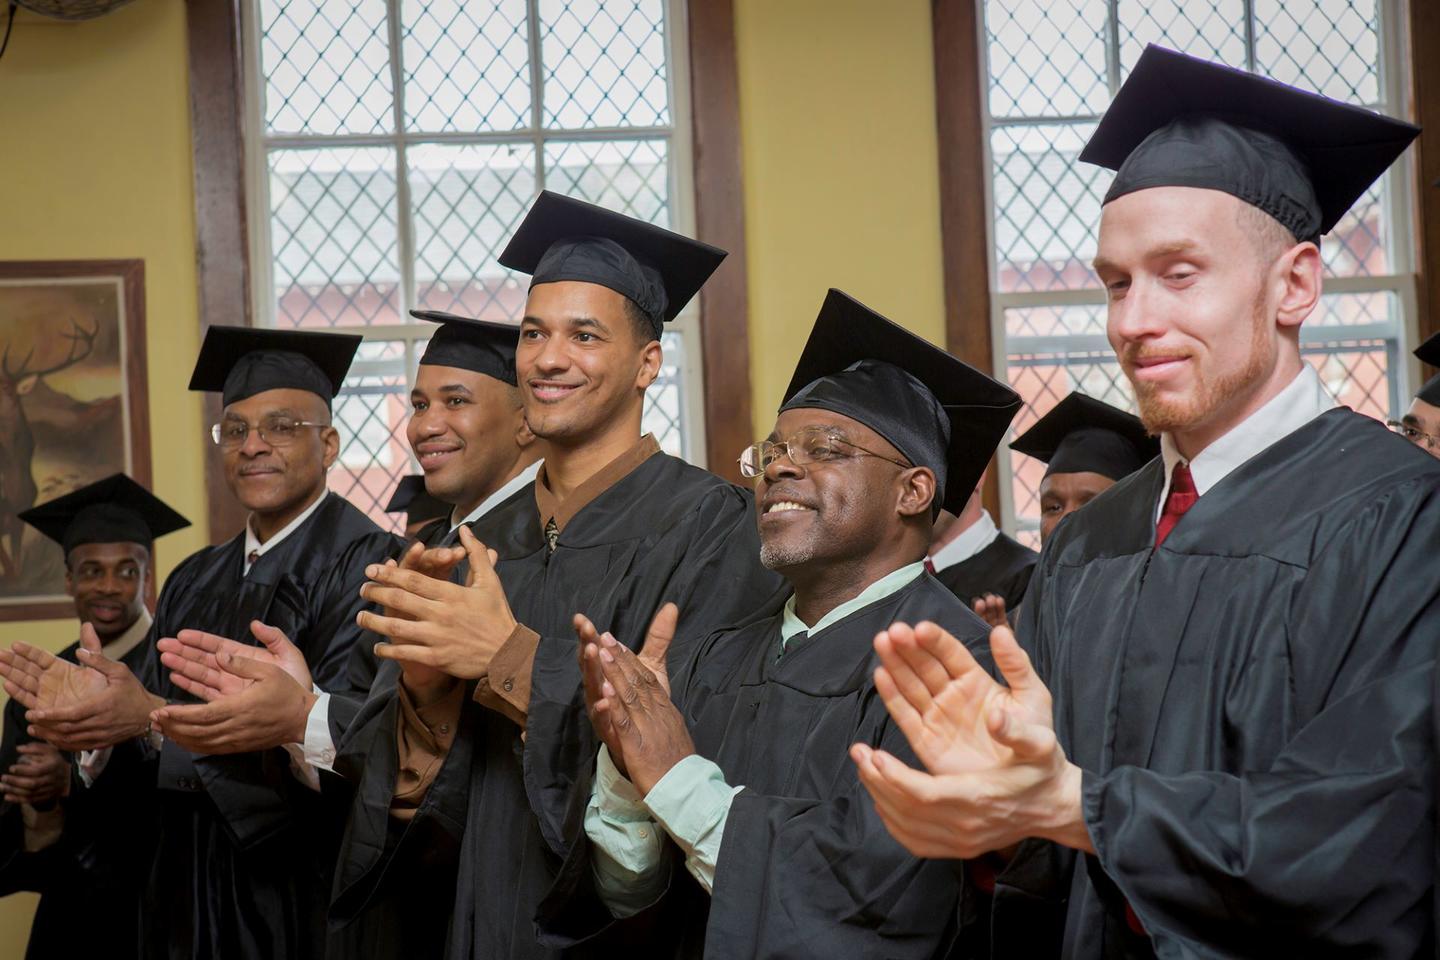 A group of men wearing caps and gowns clapping and smiling